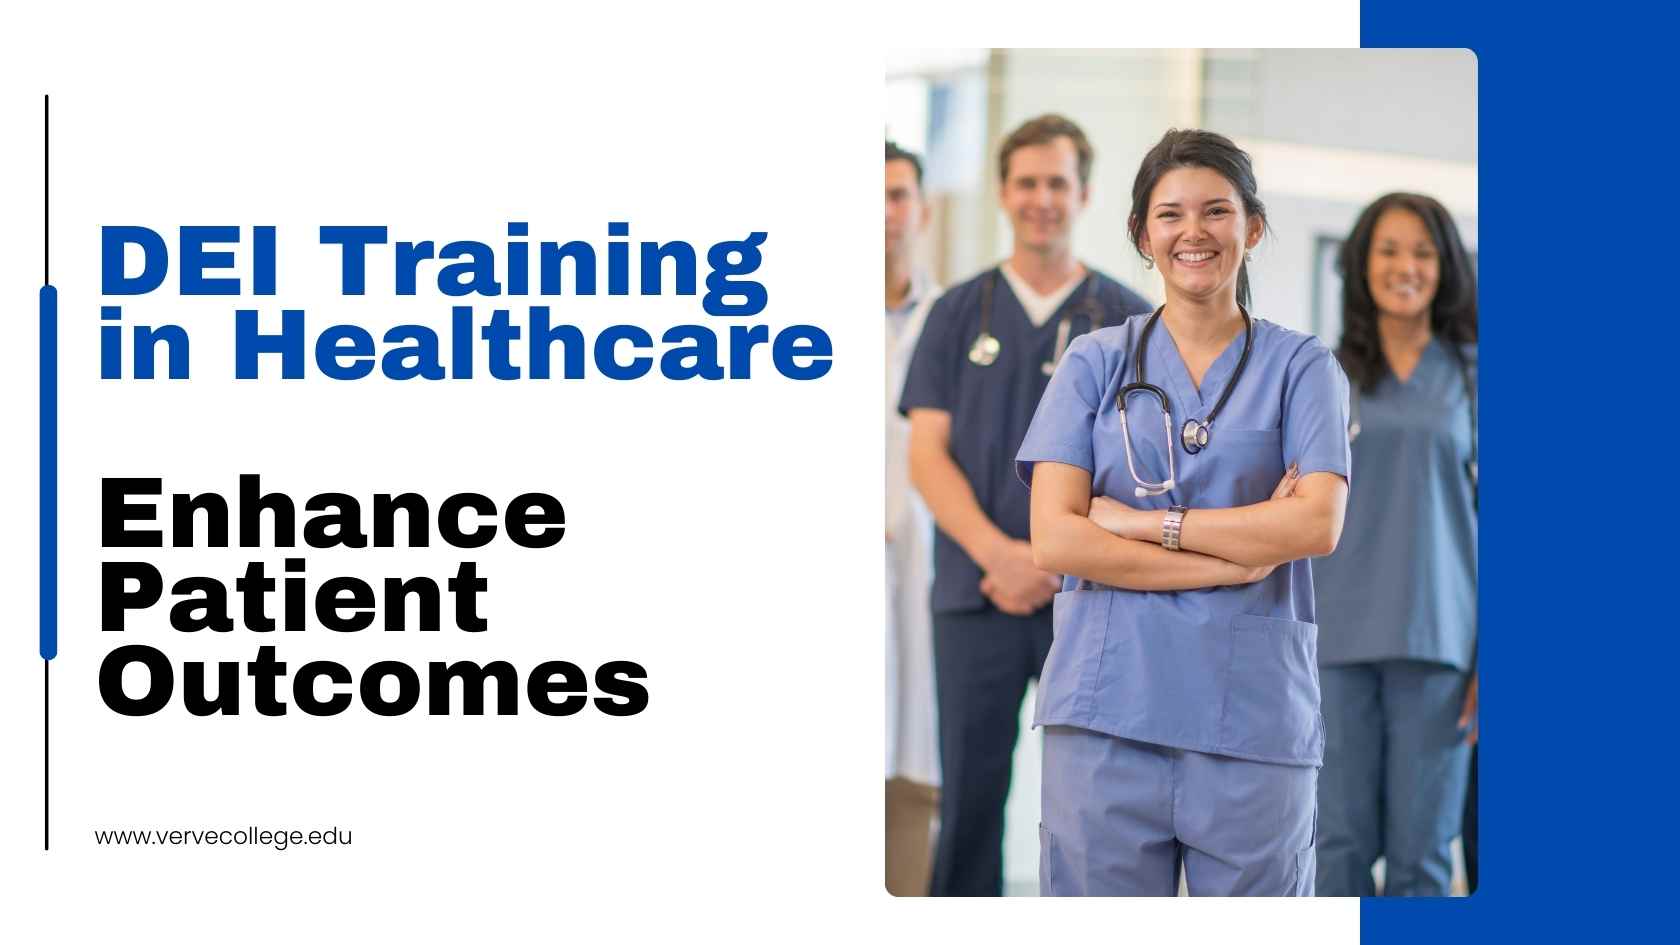 DEI Training in Healthcare: Enhance Patient Outcomes